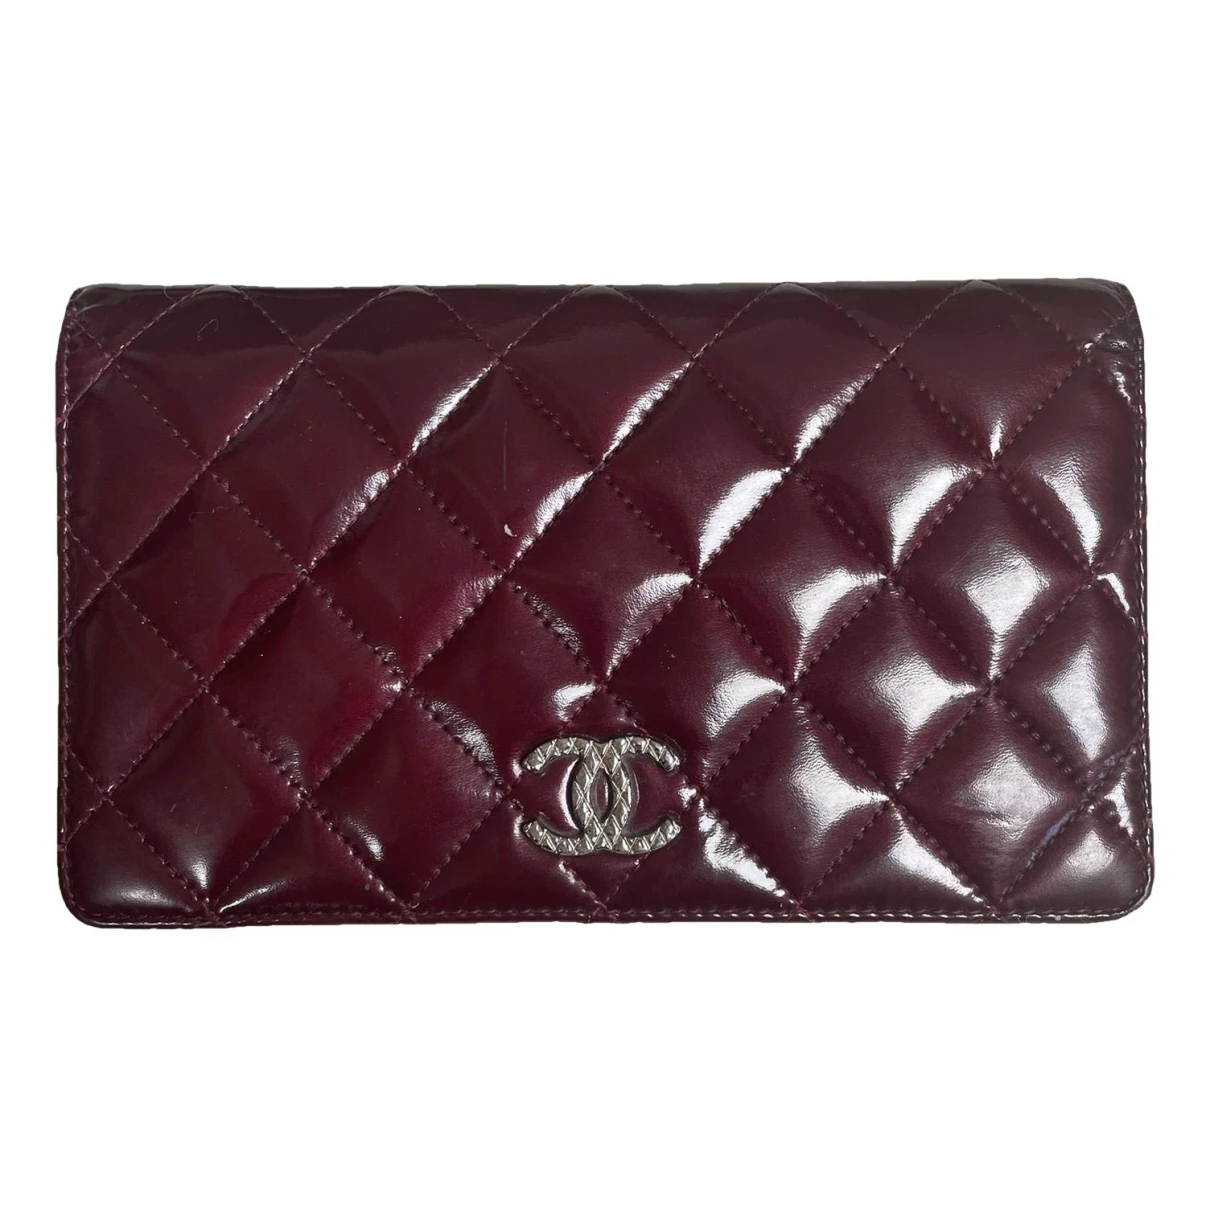 Pre-owned Chanel Timeless/classique Patent Leather Wallet In Burgundy